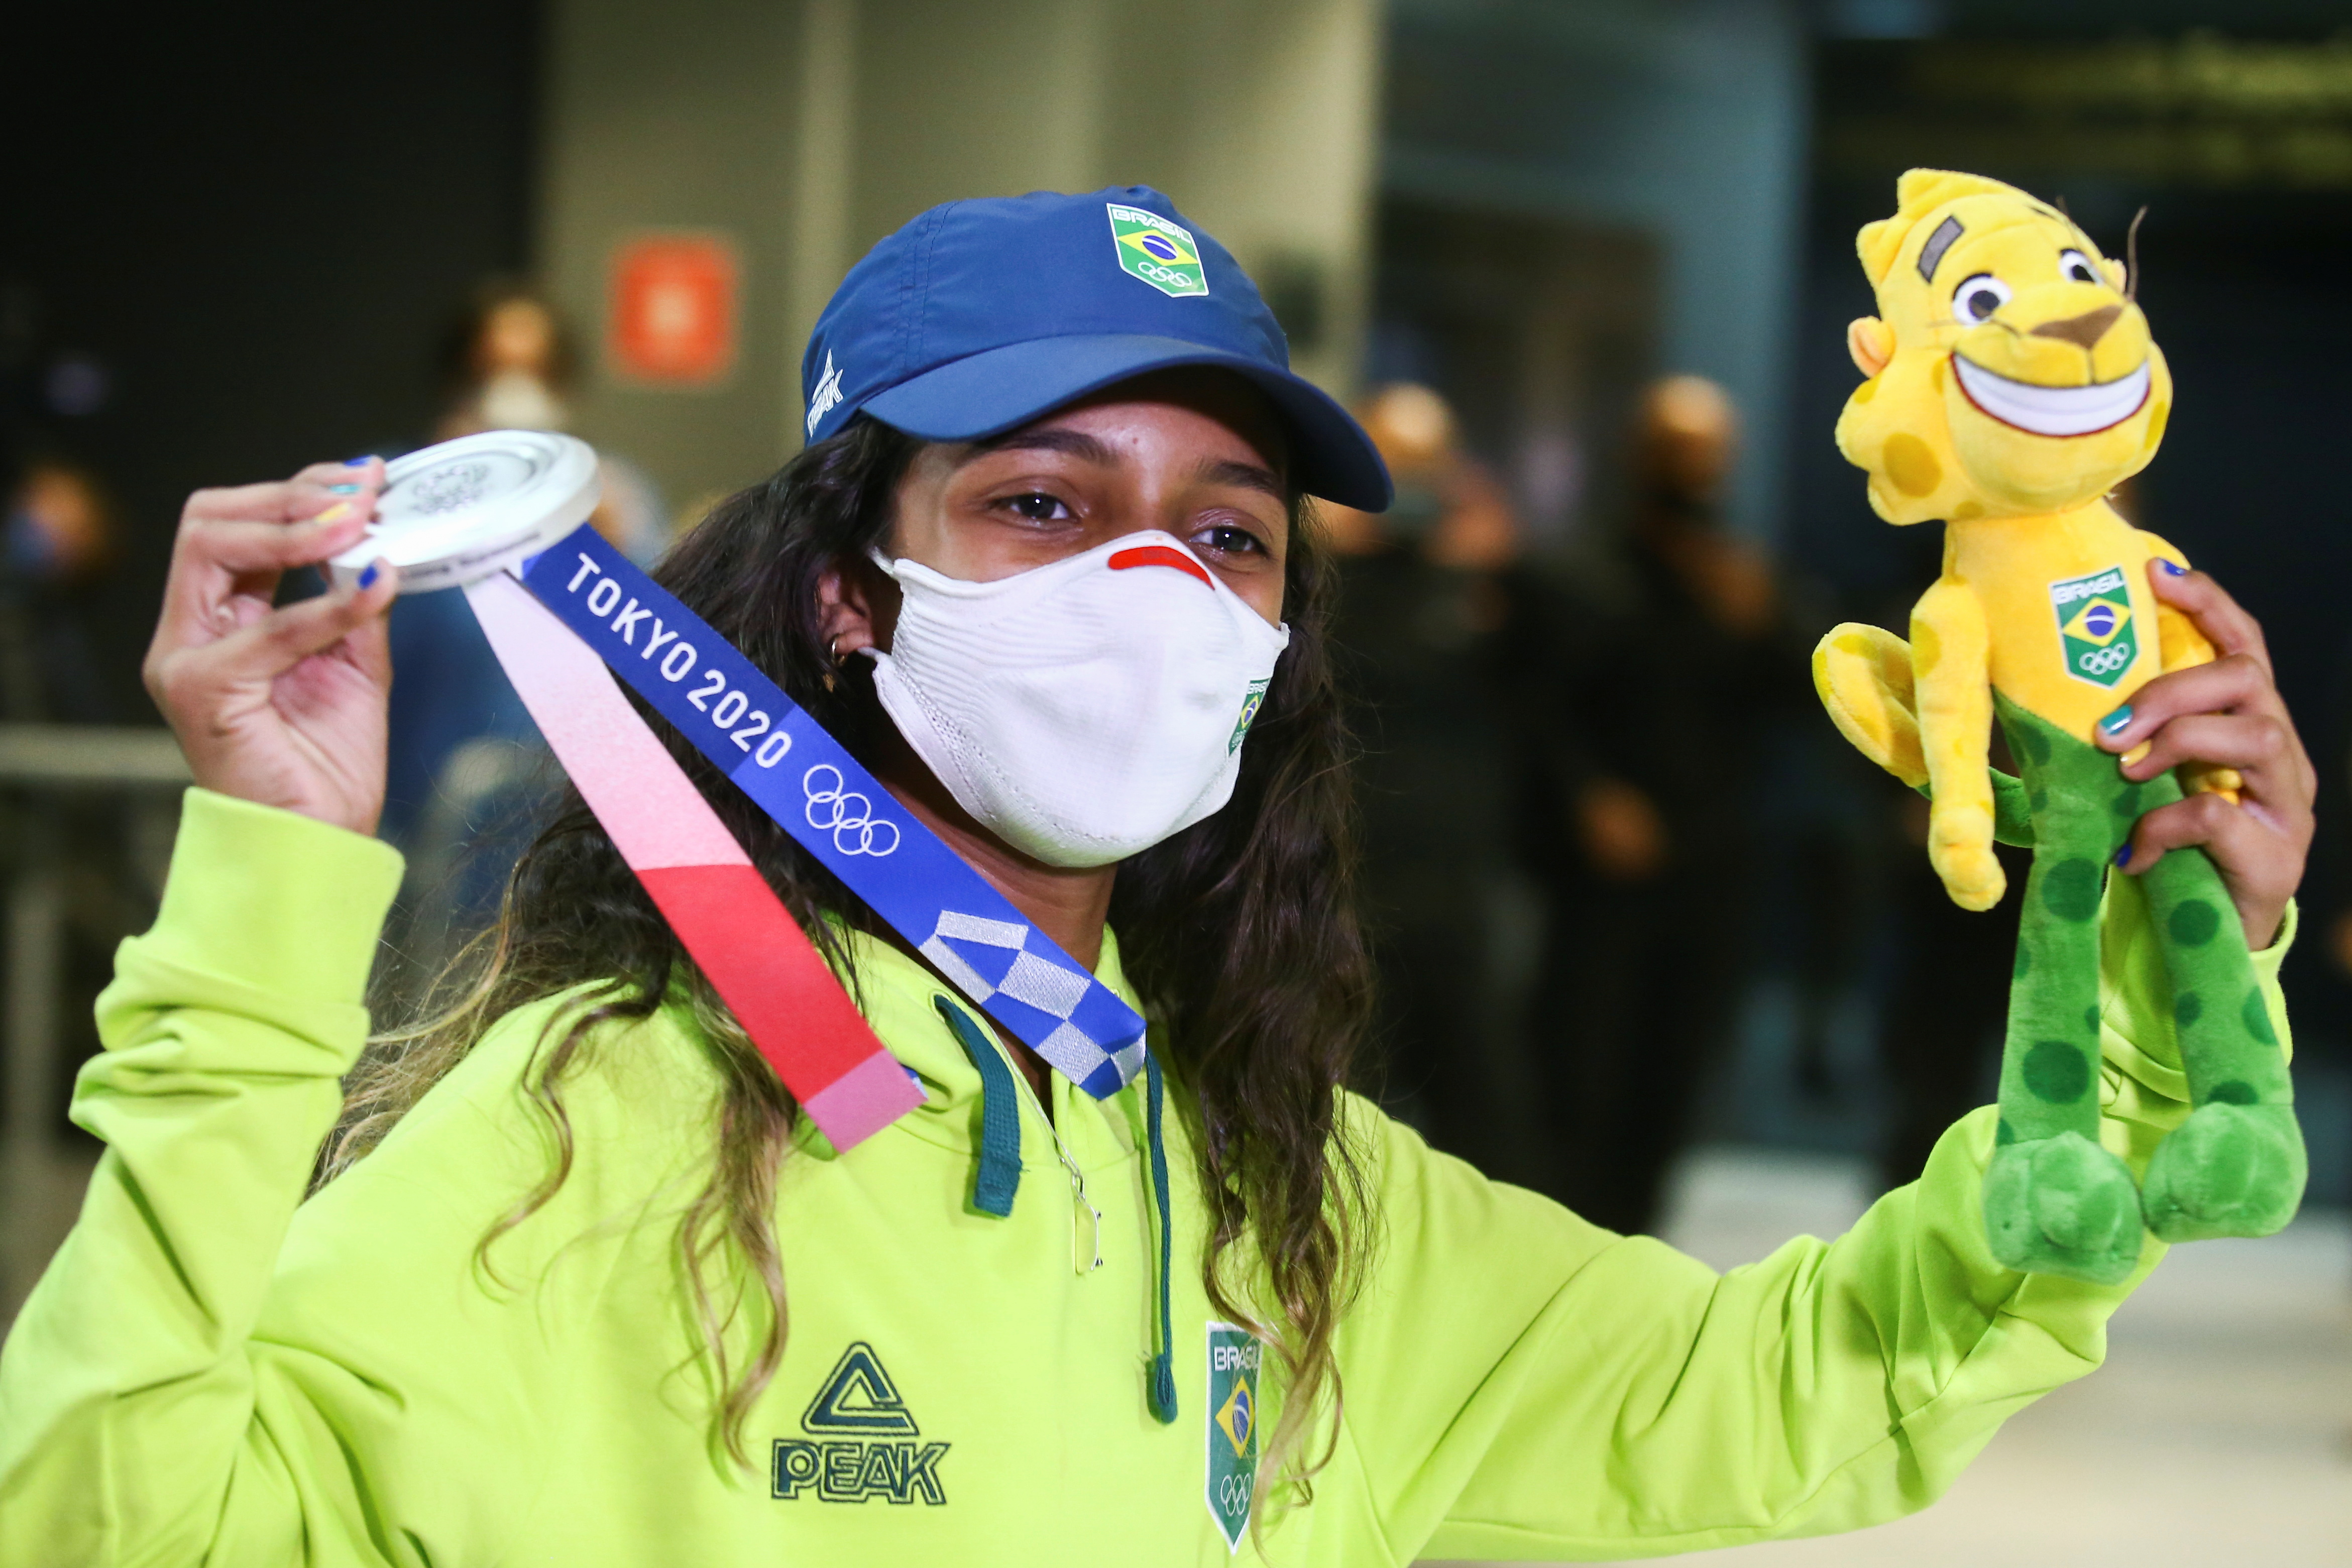 Silver Medalist at Tokyo 2020 Olympics Rayssa Leal arrives in Brazil